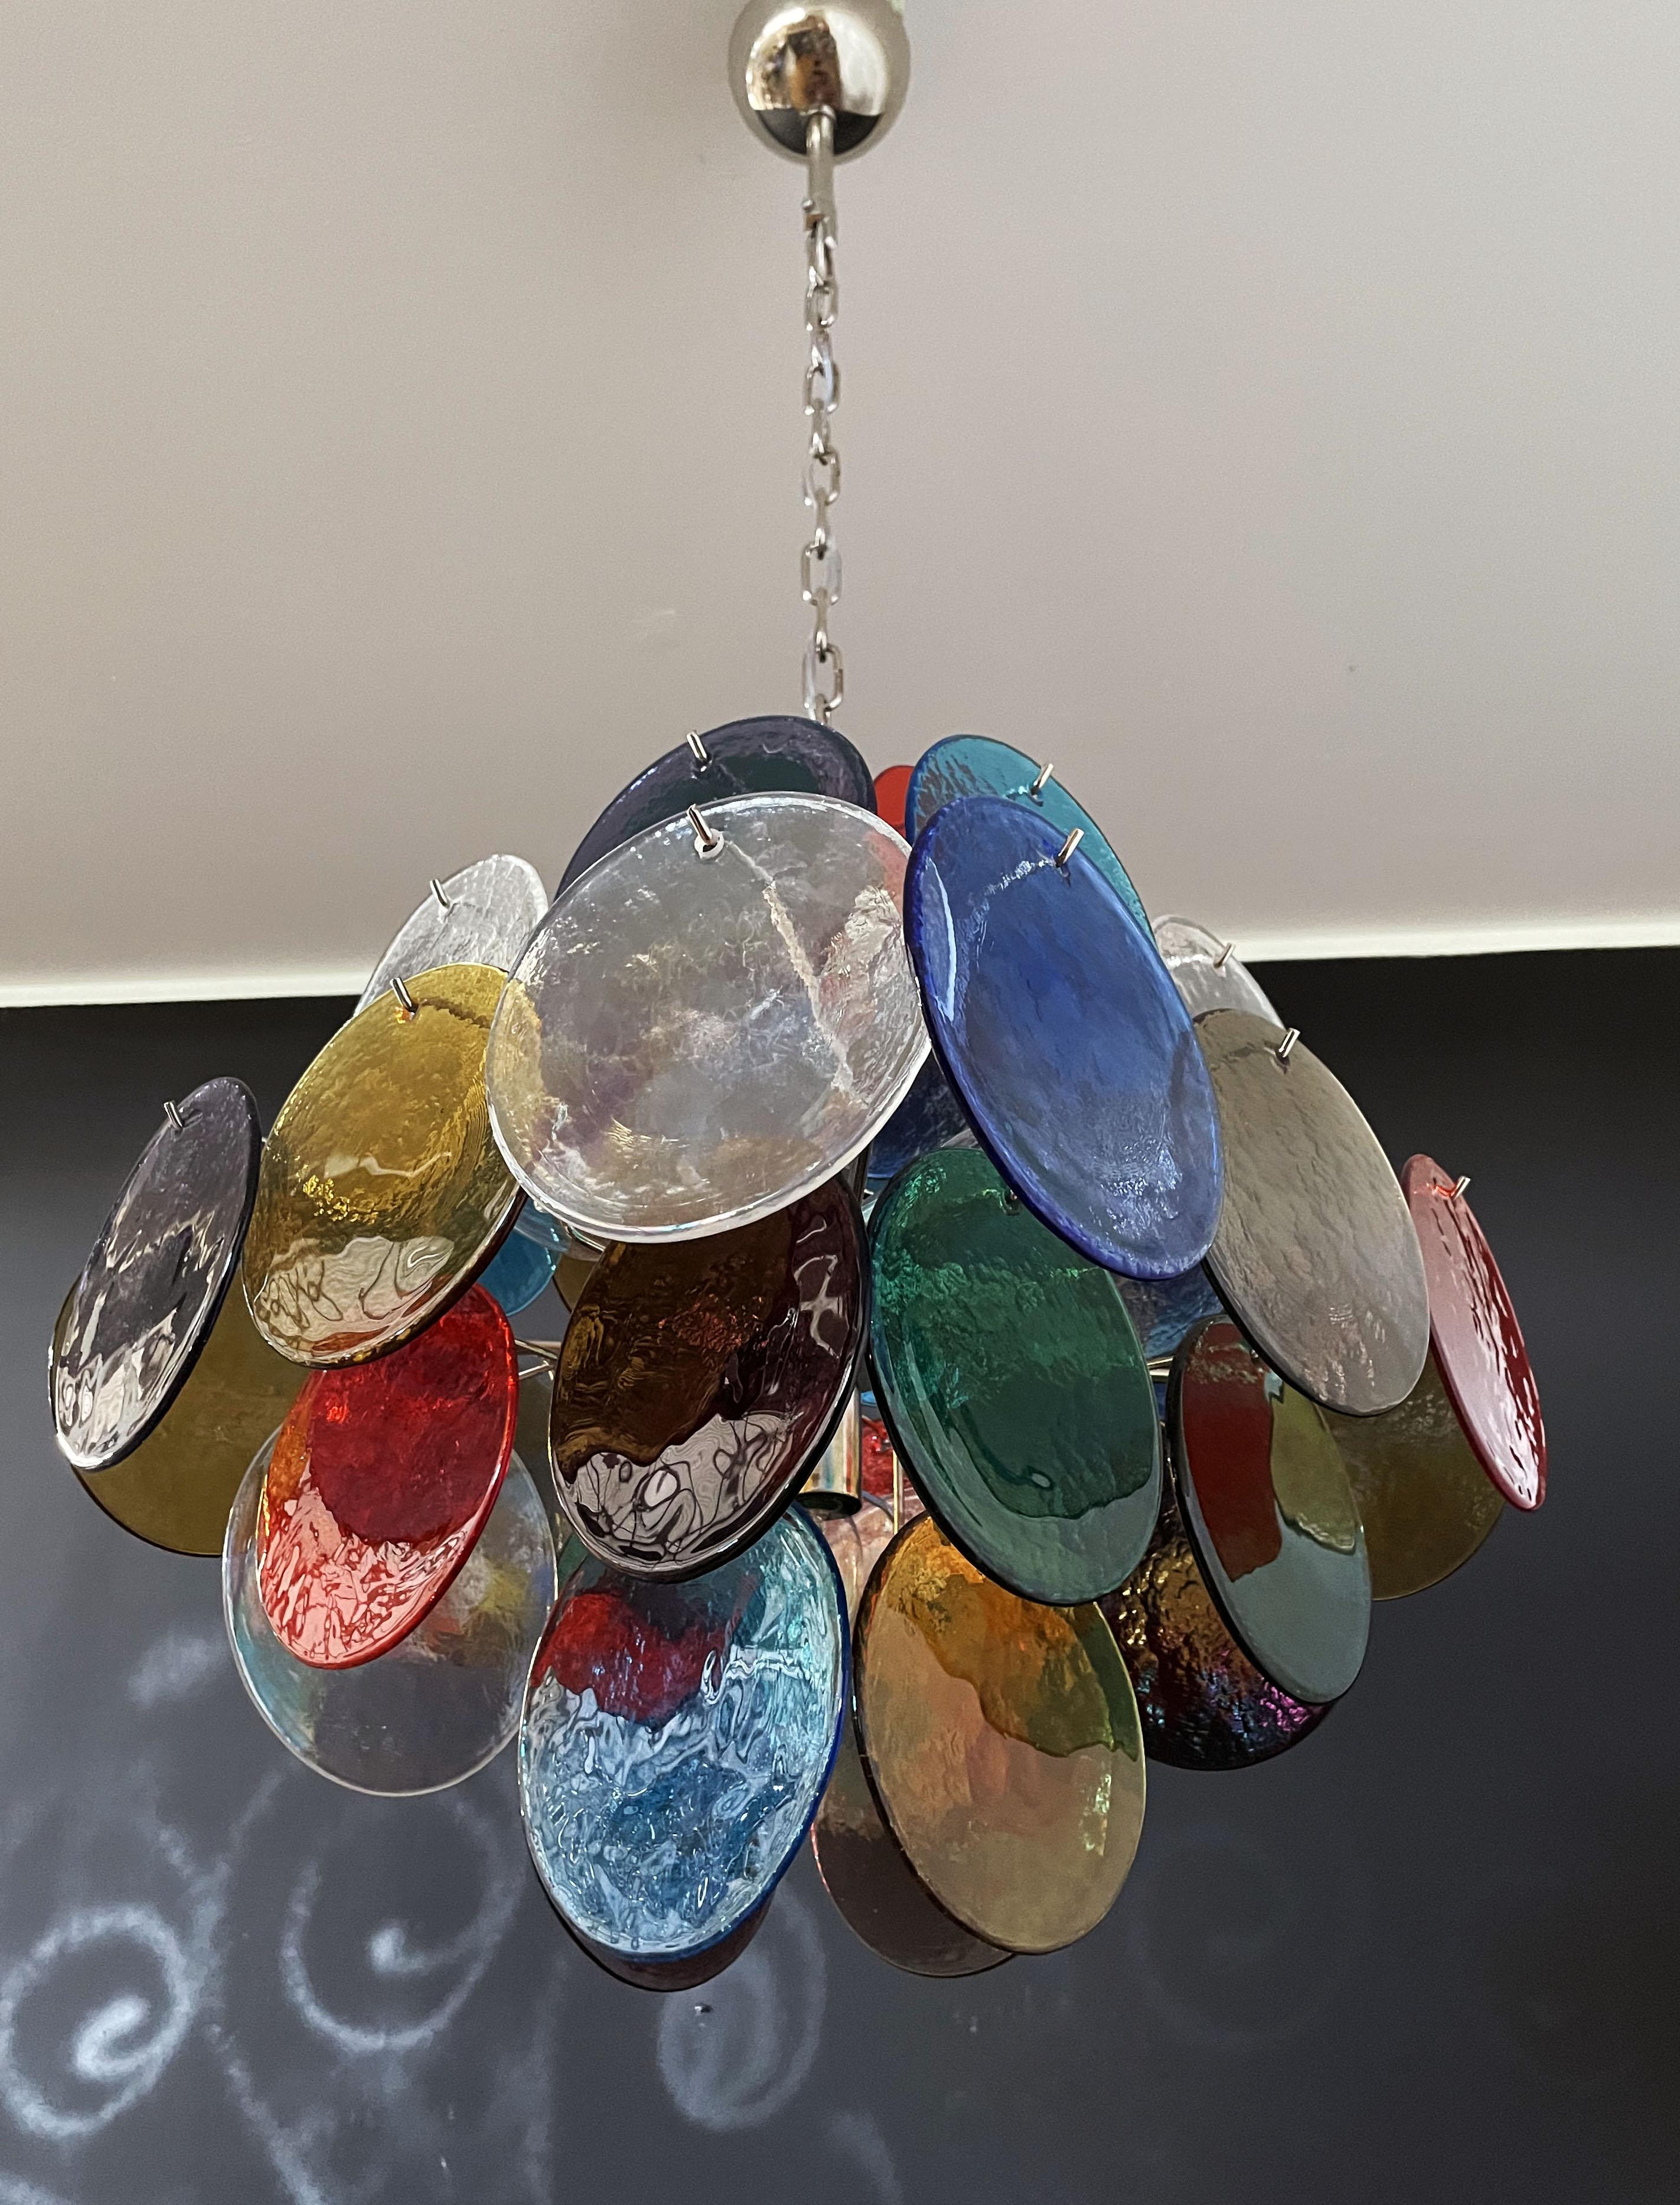 Vintage Italian Murano chandelier in Vistosi style. The chandelier has 36 fantastic multicolored discs in a nickel metal frame.
Period: late 20th century
Dimensions: 44.50 inches (150 cm) height with chain; 19.40 inches (50 cm) height without